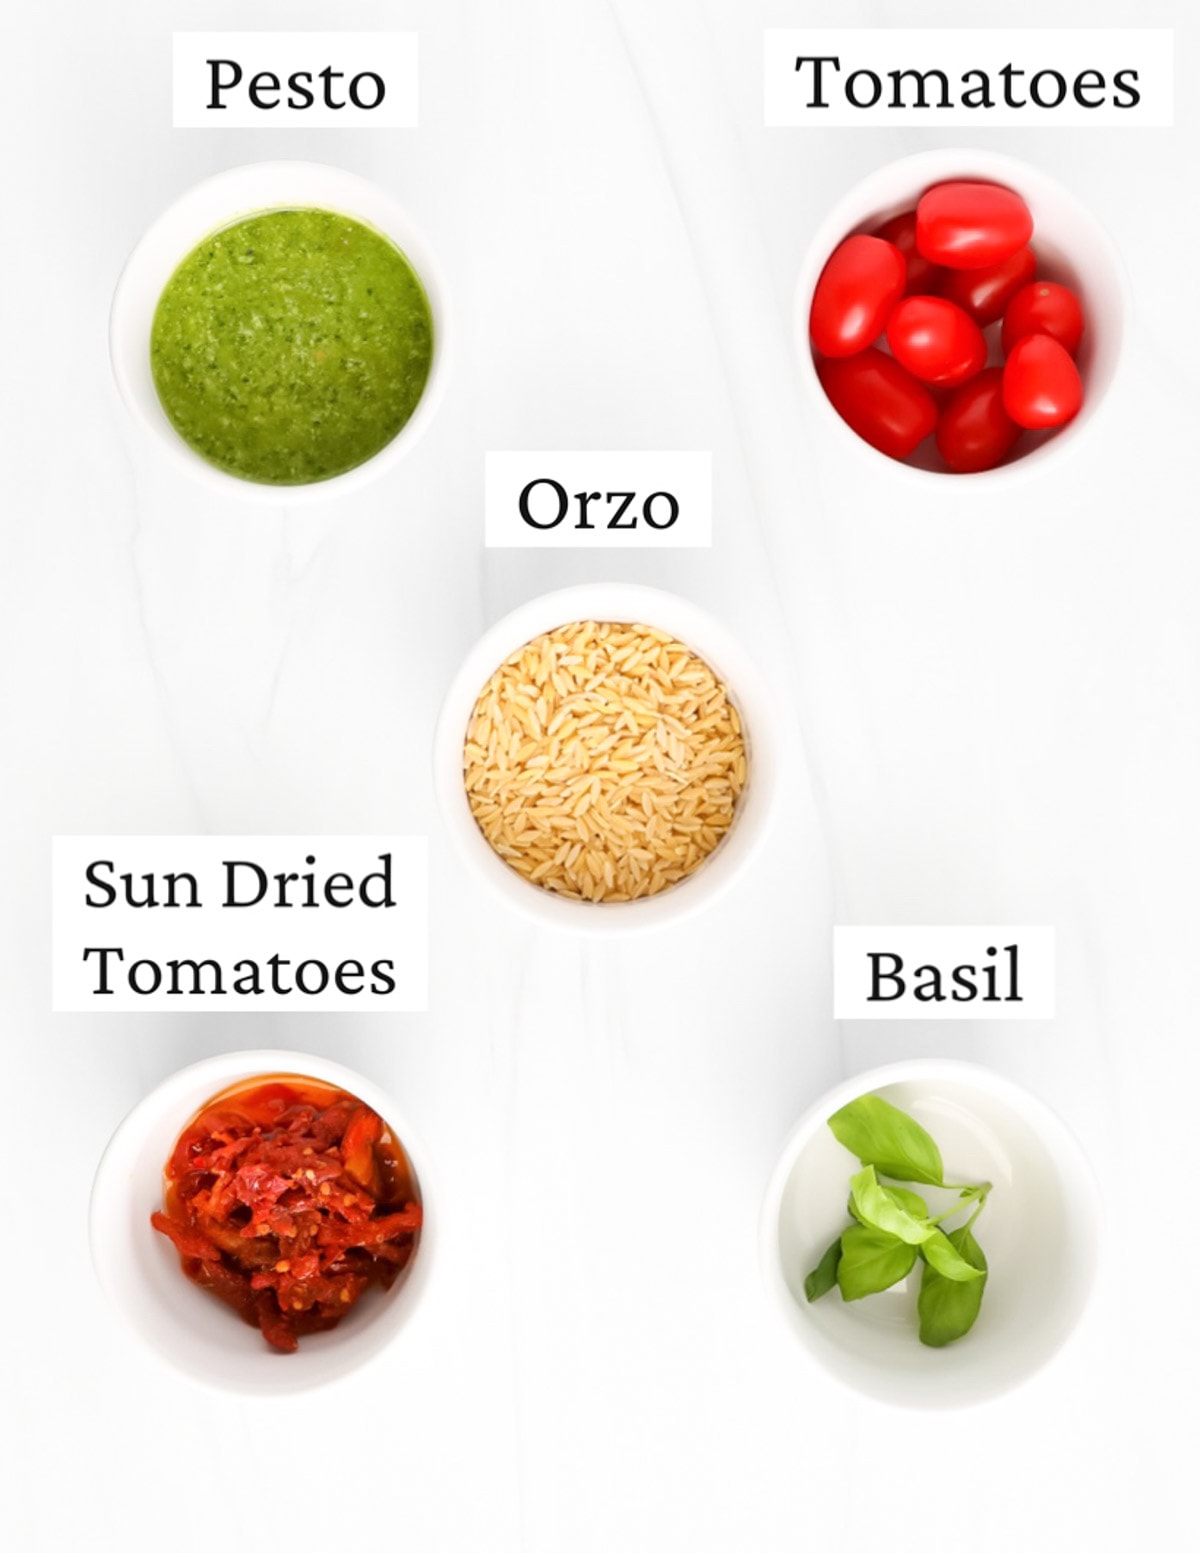 Labeled ingredients in small white bowls including: pesto, tomatoes, orzo, sun dried tomatoes, and basil.